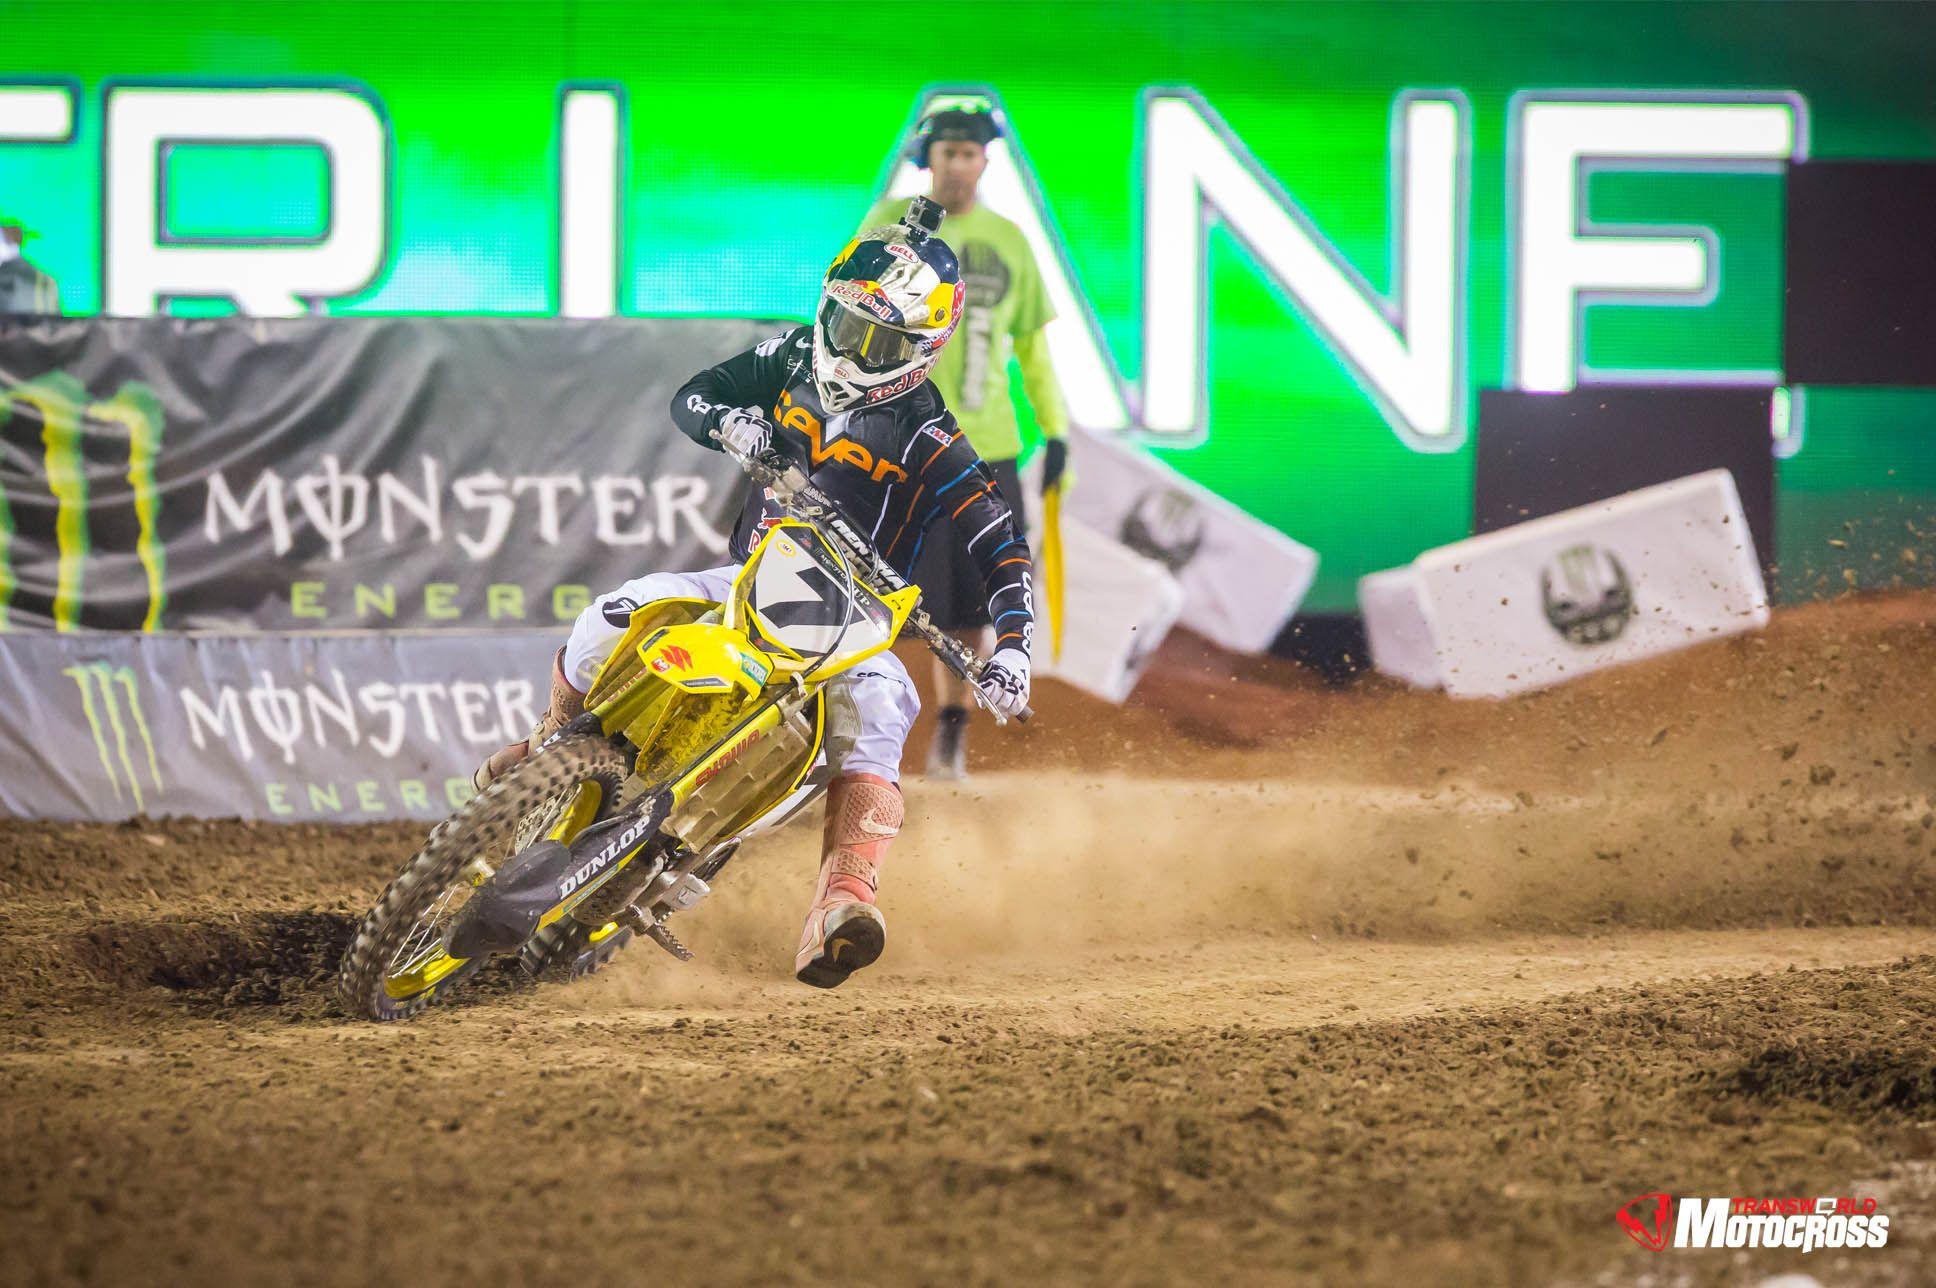 Back On Top: JS7 Wallpaper And Photo Gallery. TransWorld Motocross